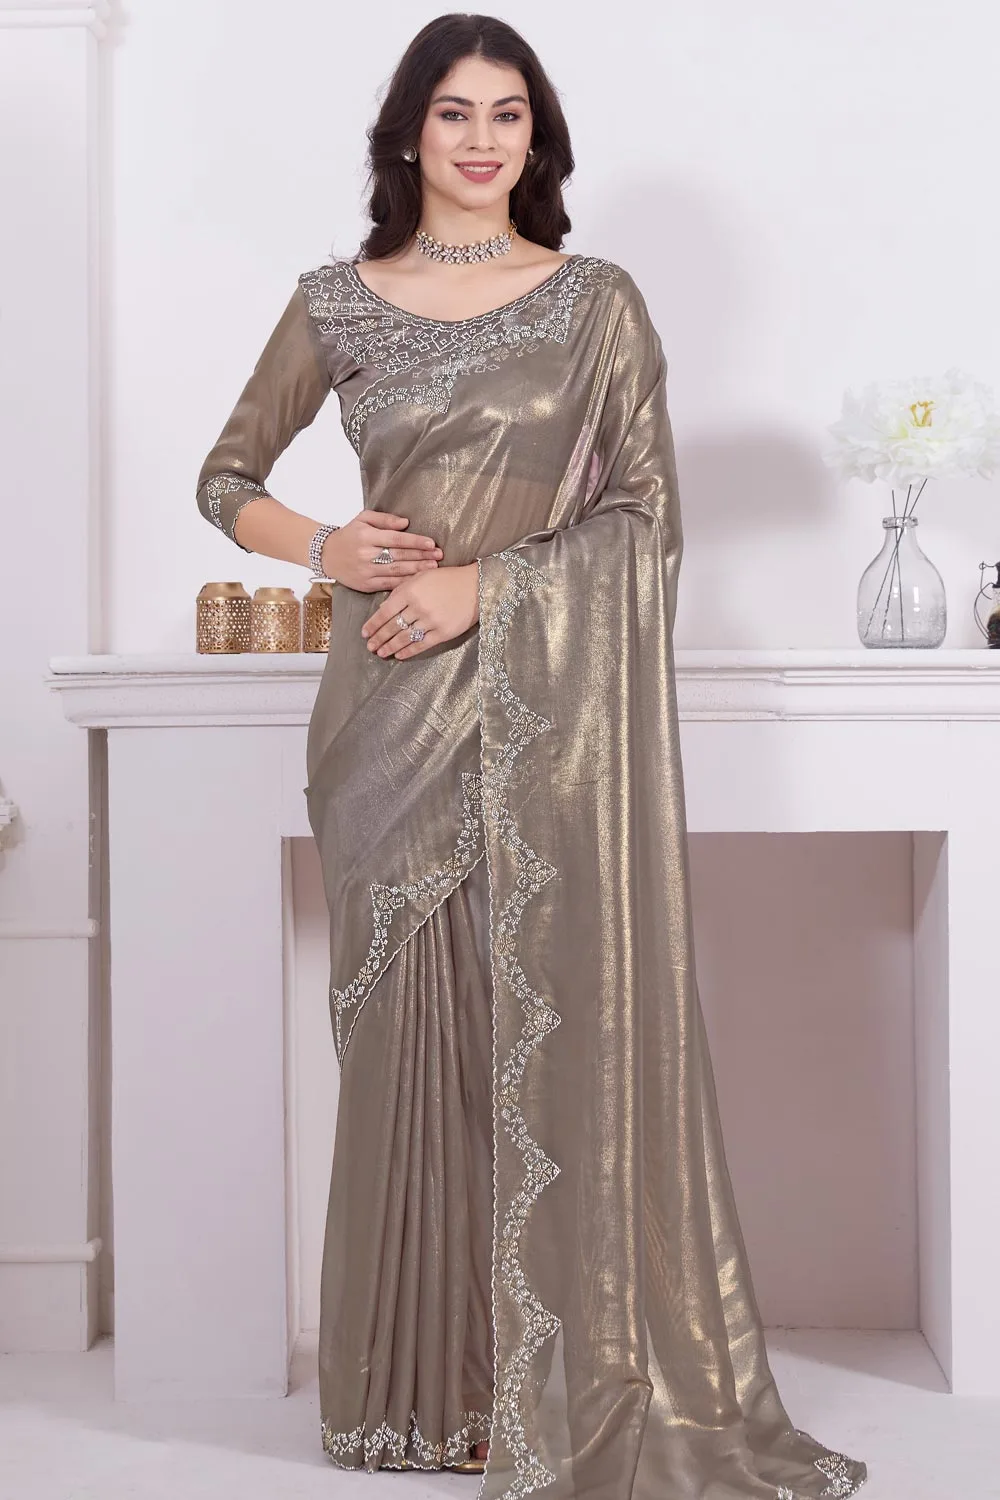 Fancy Beige Saree with Raina Net Coating Fabric and Dual-Colored Zircon Border